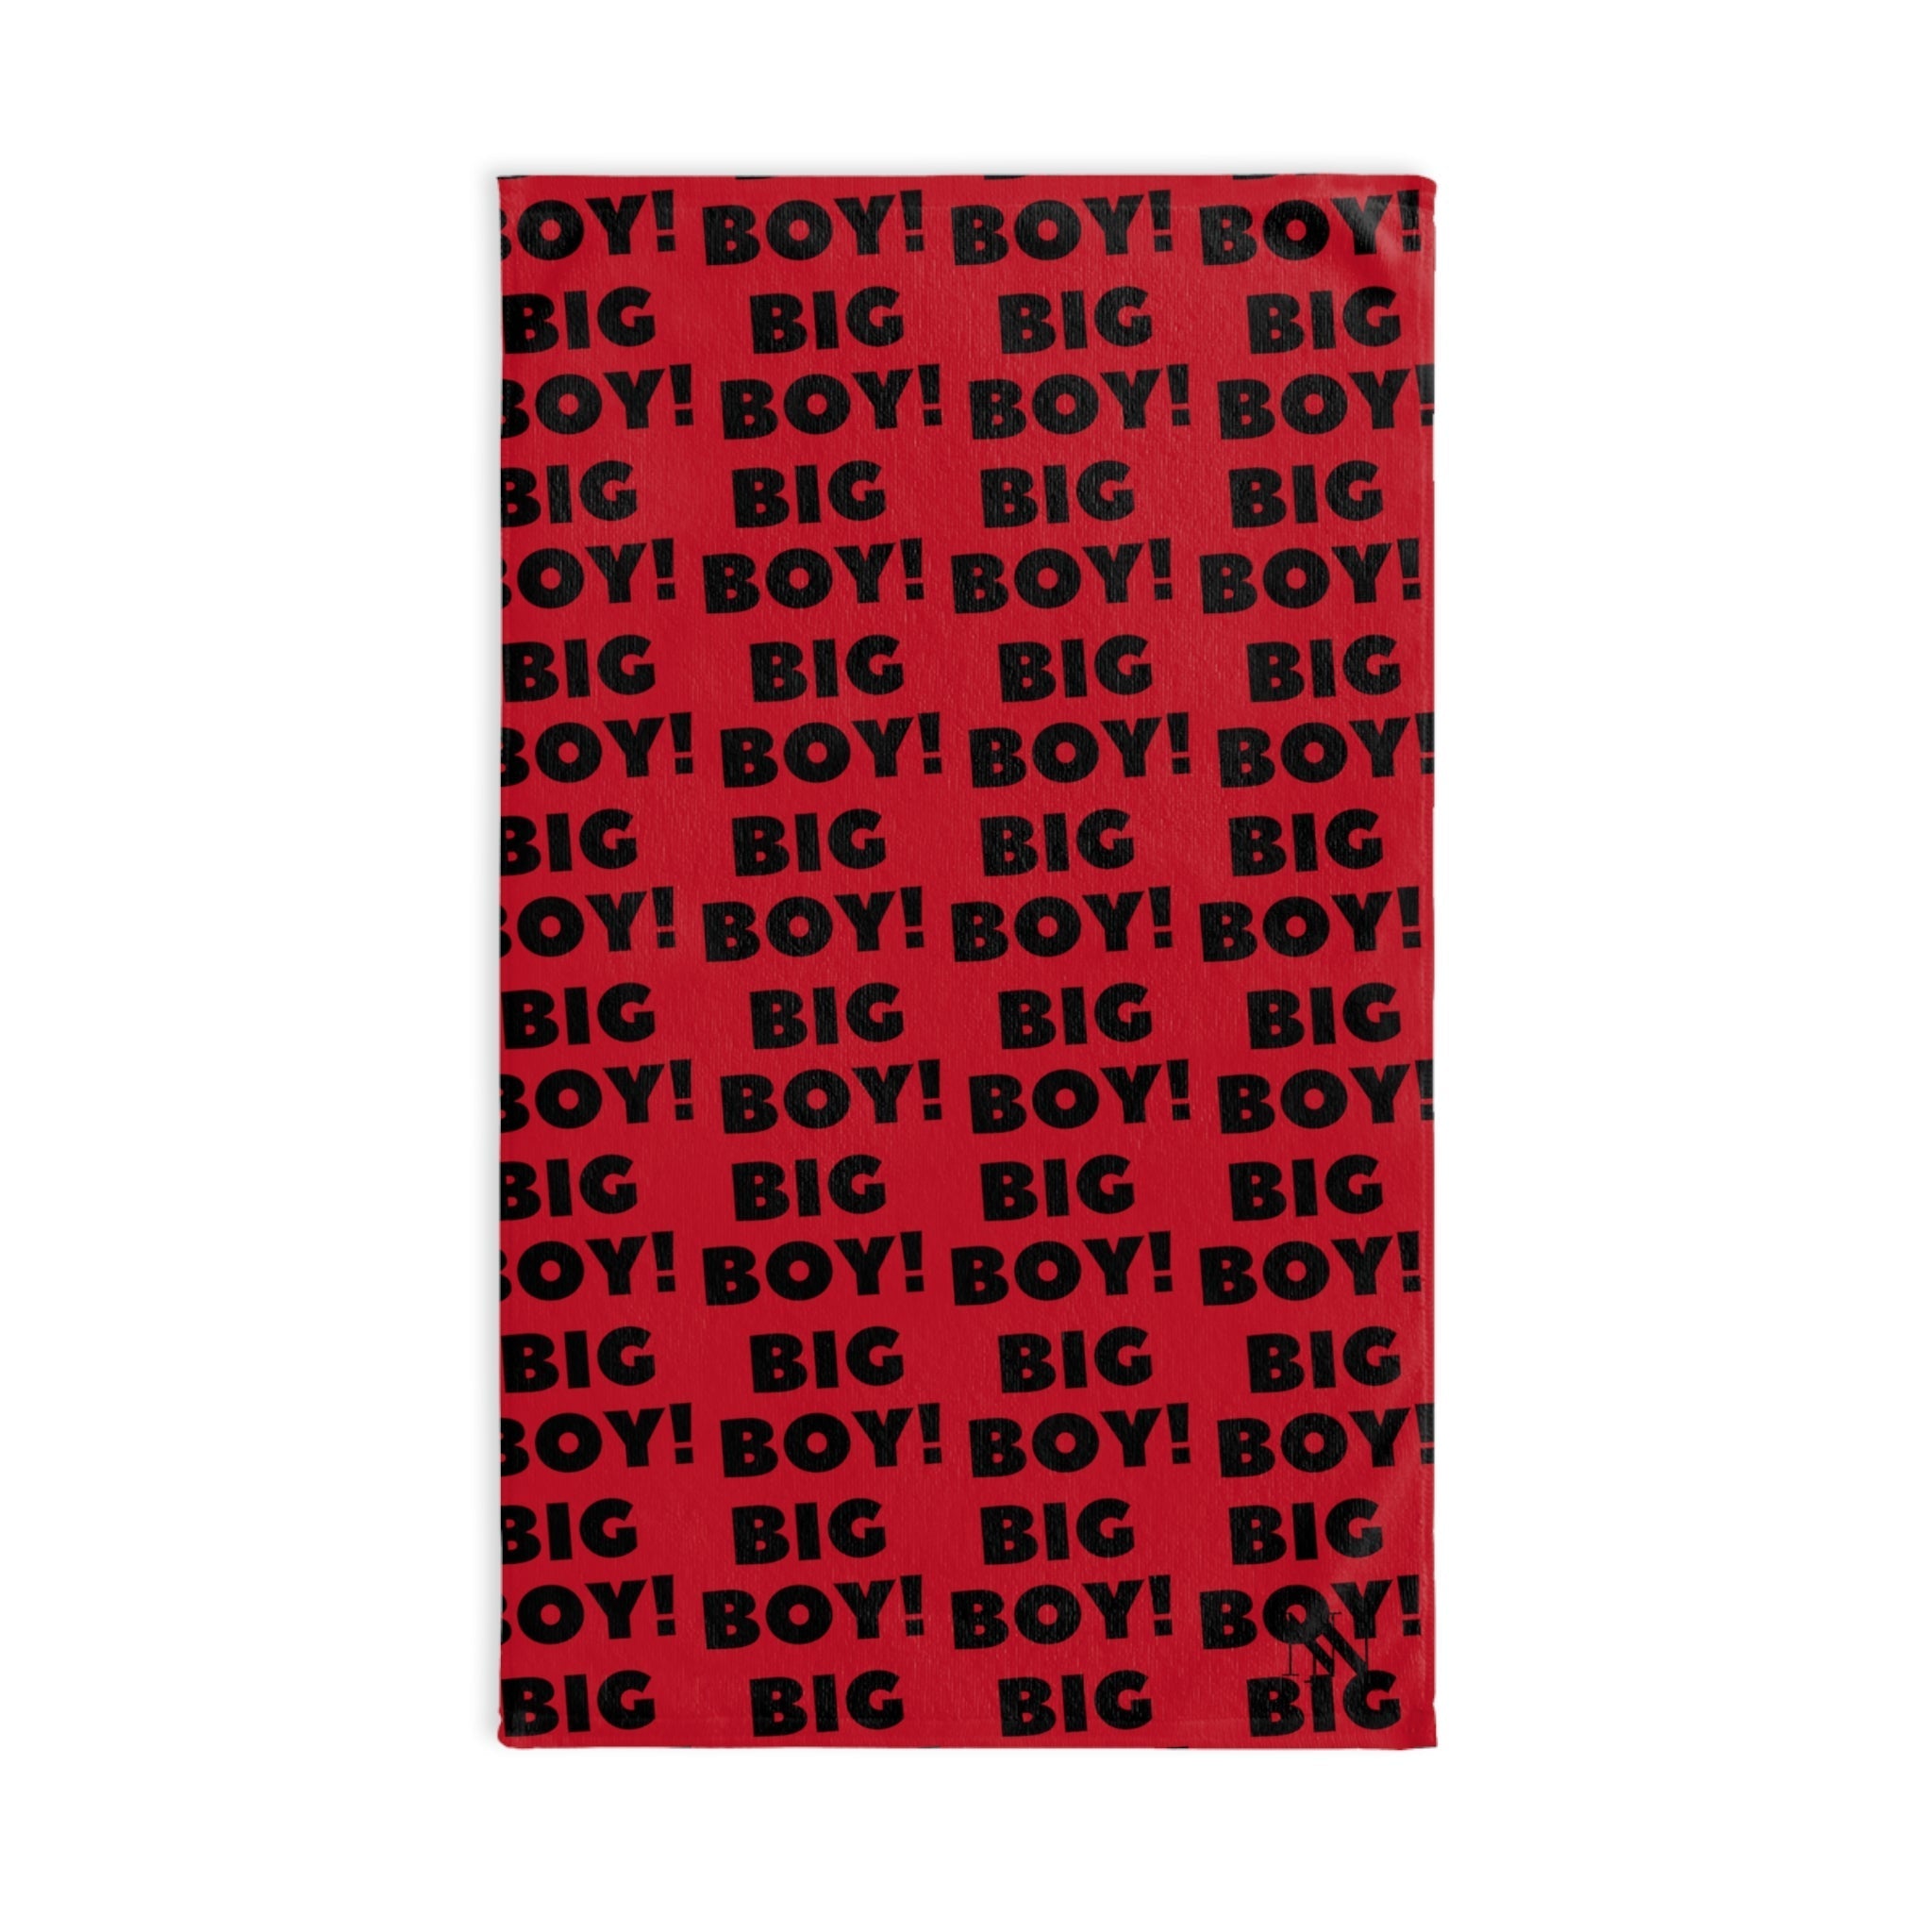 Big Boy Pattern Red | Sexy Gifts for Boyfriend, Funny Towel Romantic Gift for Wedding Couple Fiance First Year 2nd Anniversary Valentines, Party Gag Gifts, Joke Humor Cloth for Husband Men BF NECTAR NAPKINS